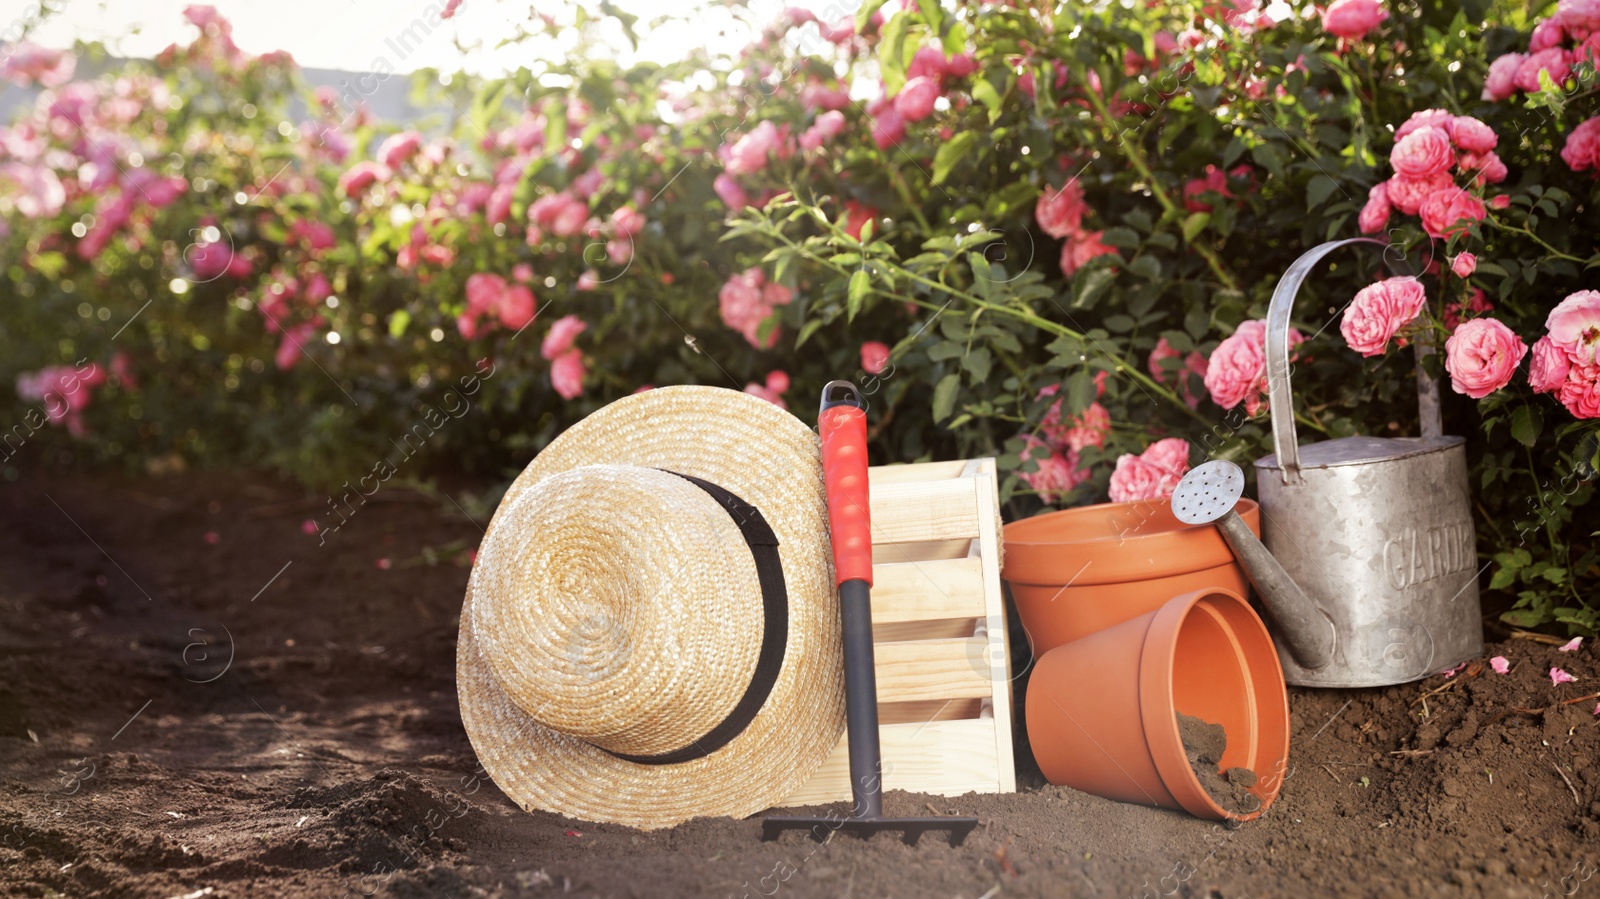 Photo of Straw hat, gardening tools and equipment near rose bushes outdoors